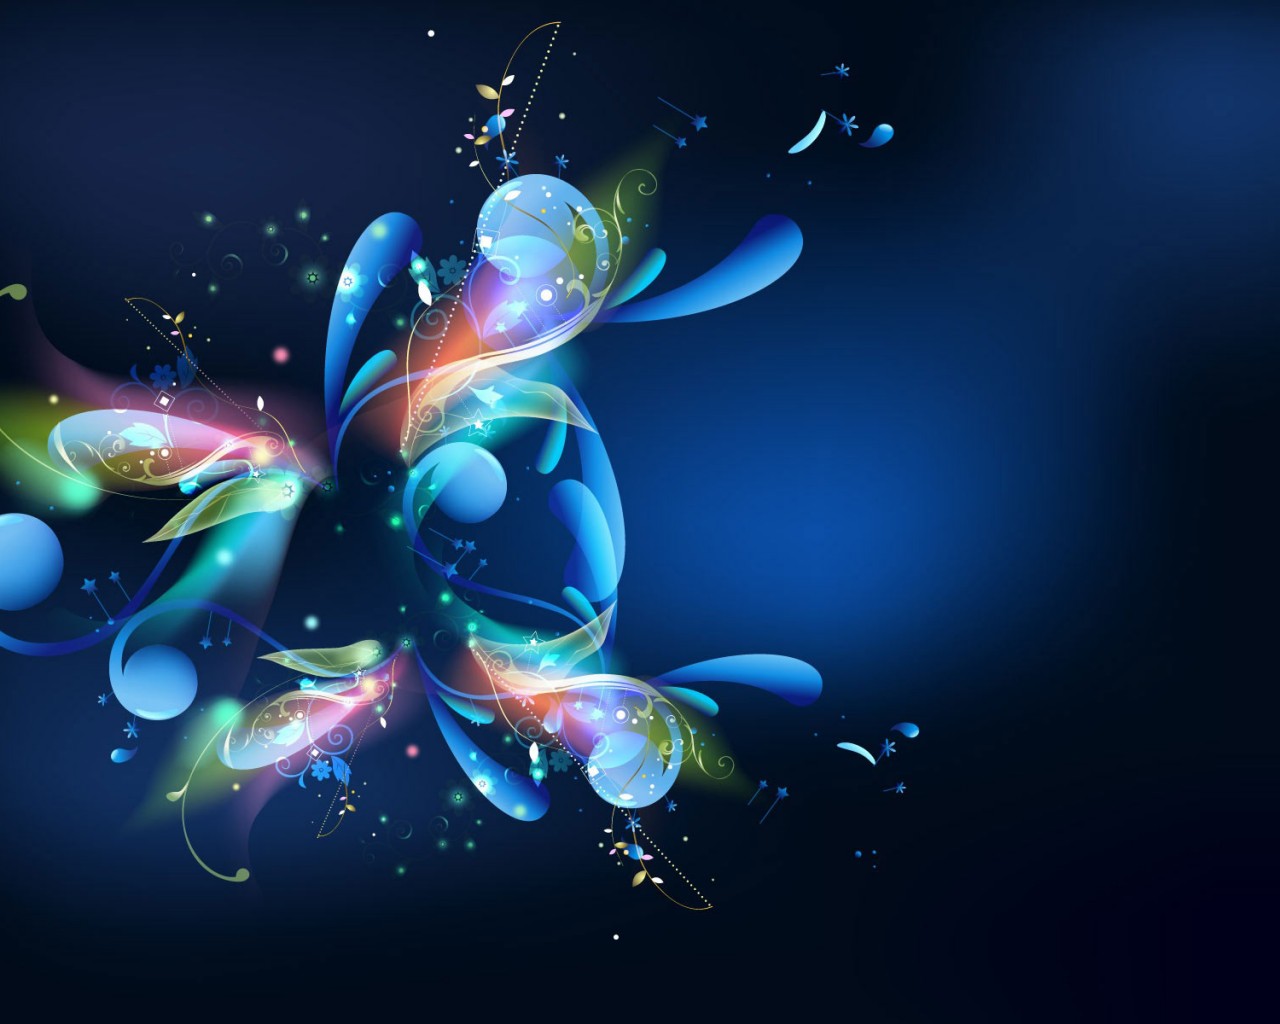 Download the new Apple Studio Display wallpaper right here - 9to5Mac-thanhphatduhoc.com.vn